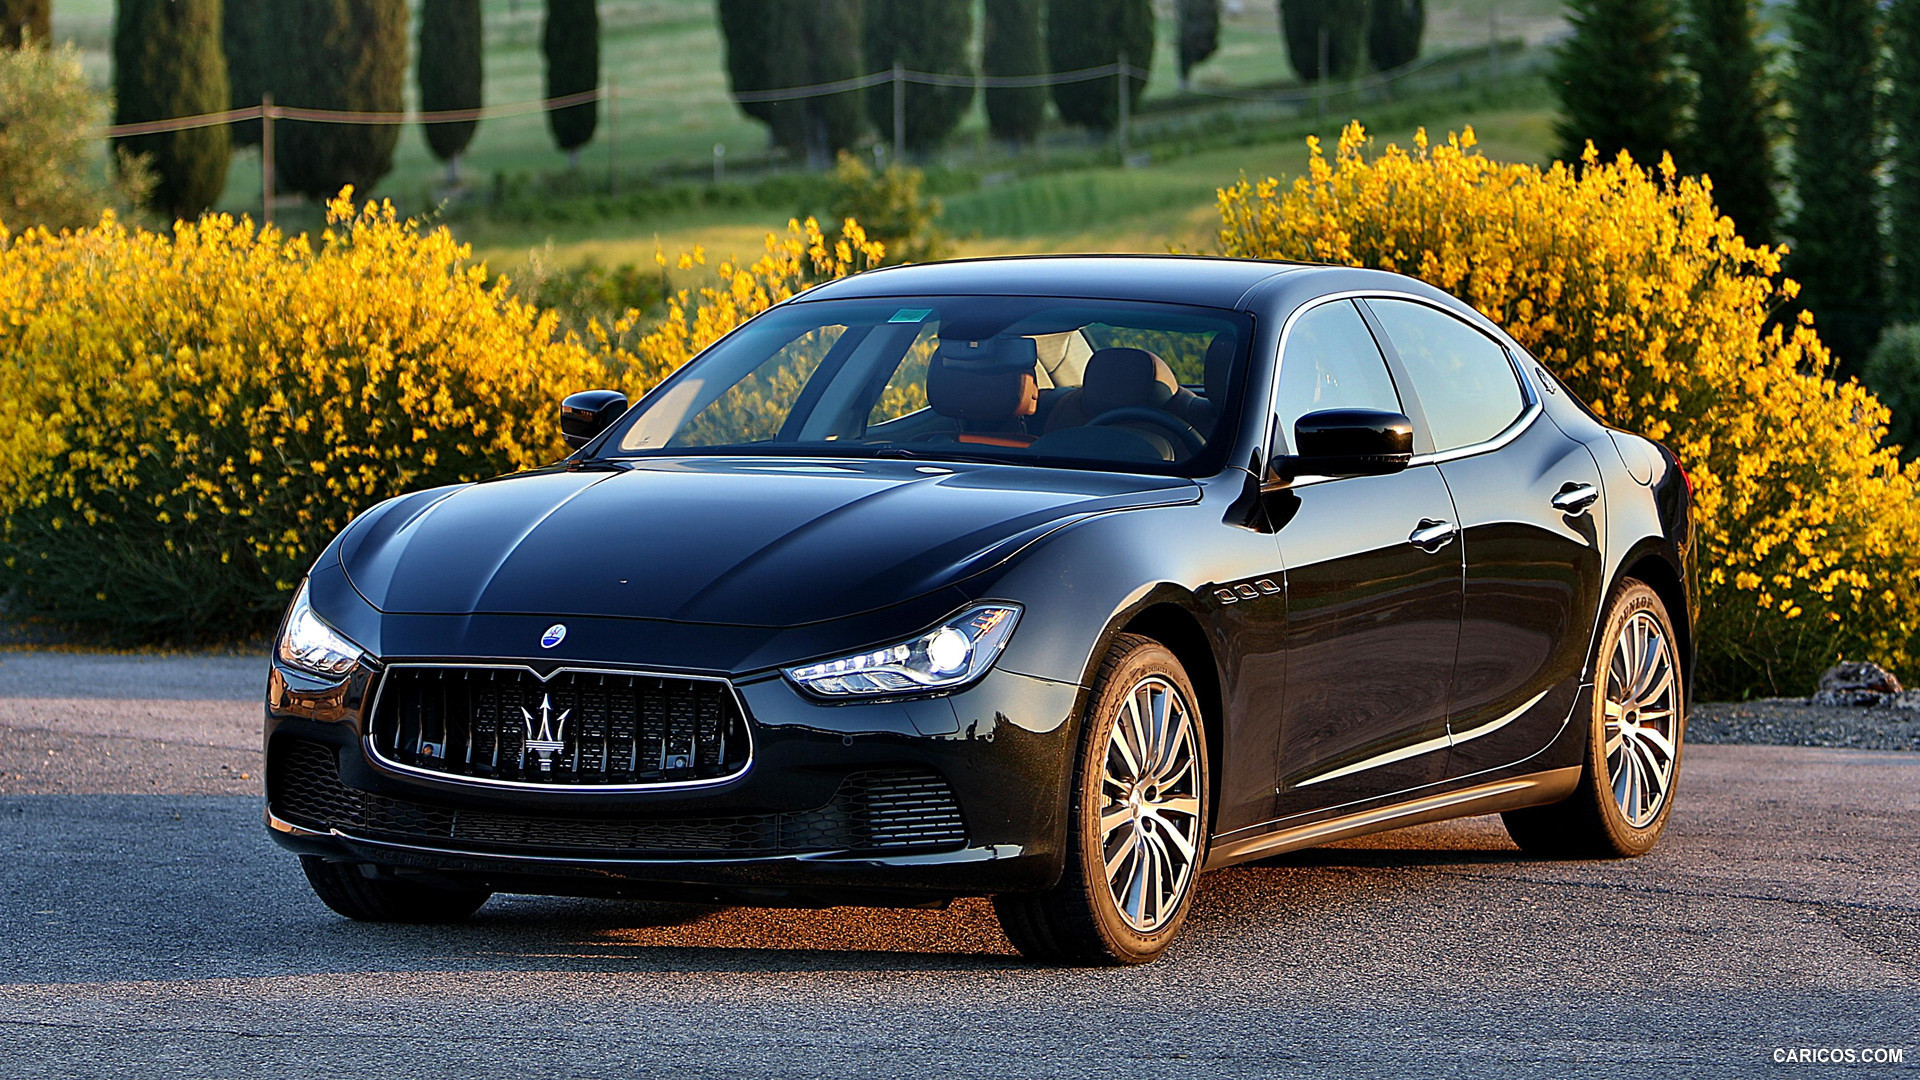 New car Maserati Ghibli wallpapers and images   wallpapers pictures